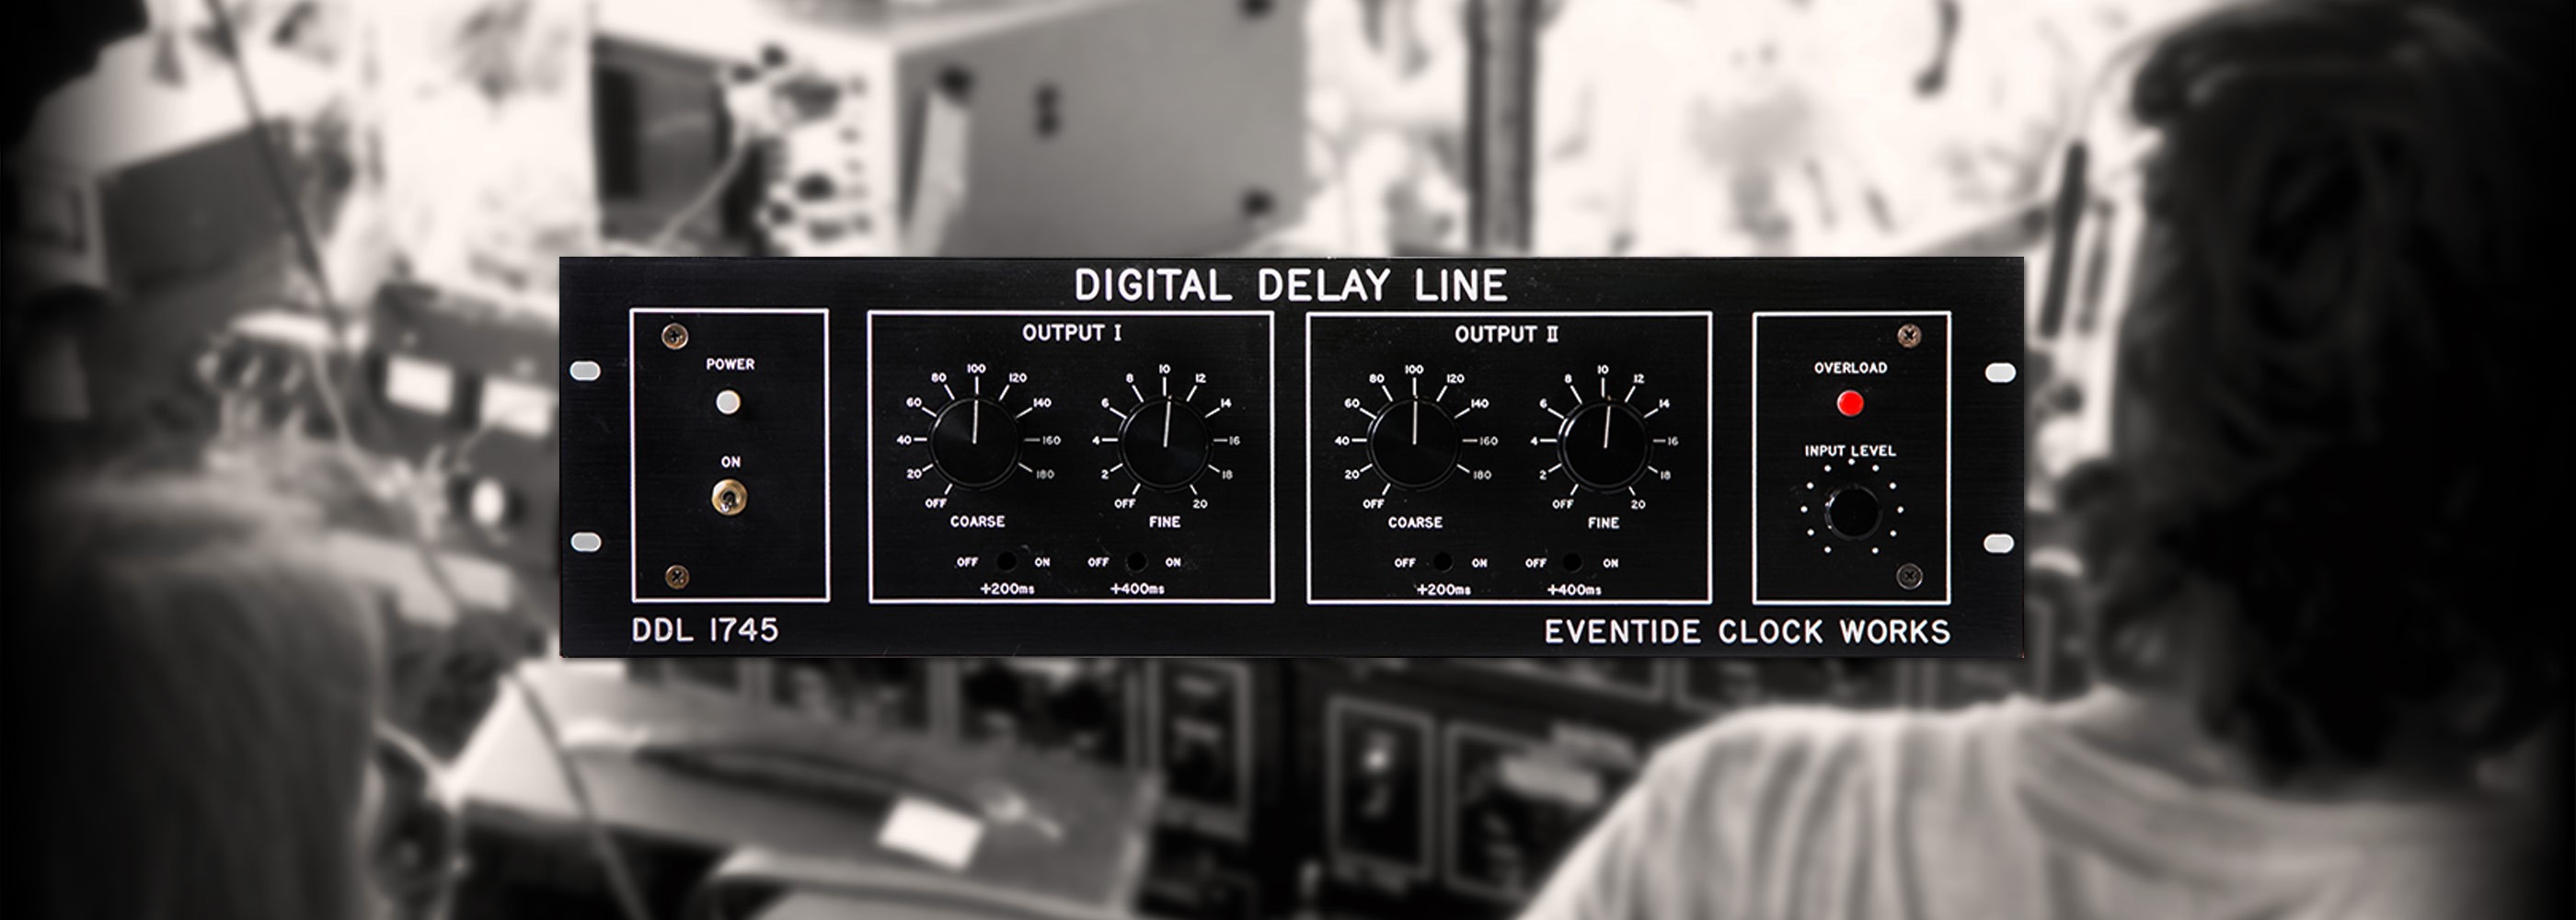 There for the Dawn of Digital Audio Production: Eventide DDL 1745 Digital Delay Inducted into TECnology Hall of Fame